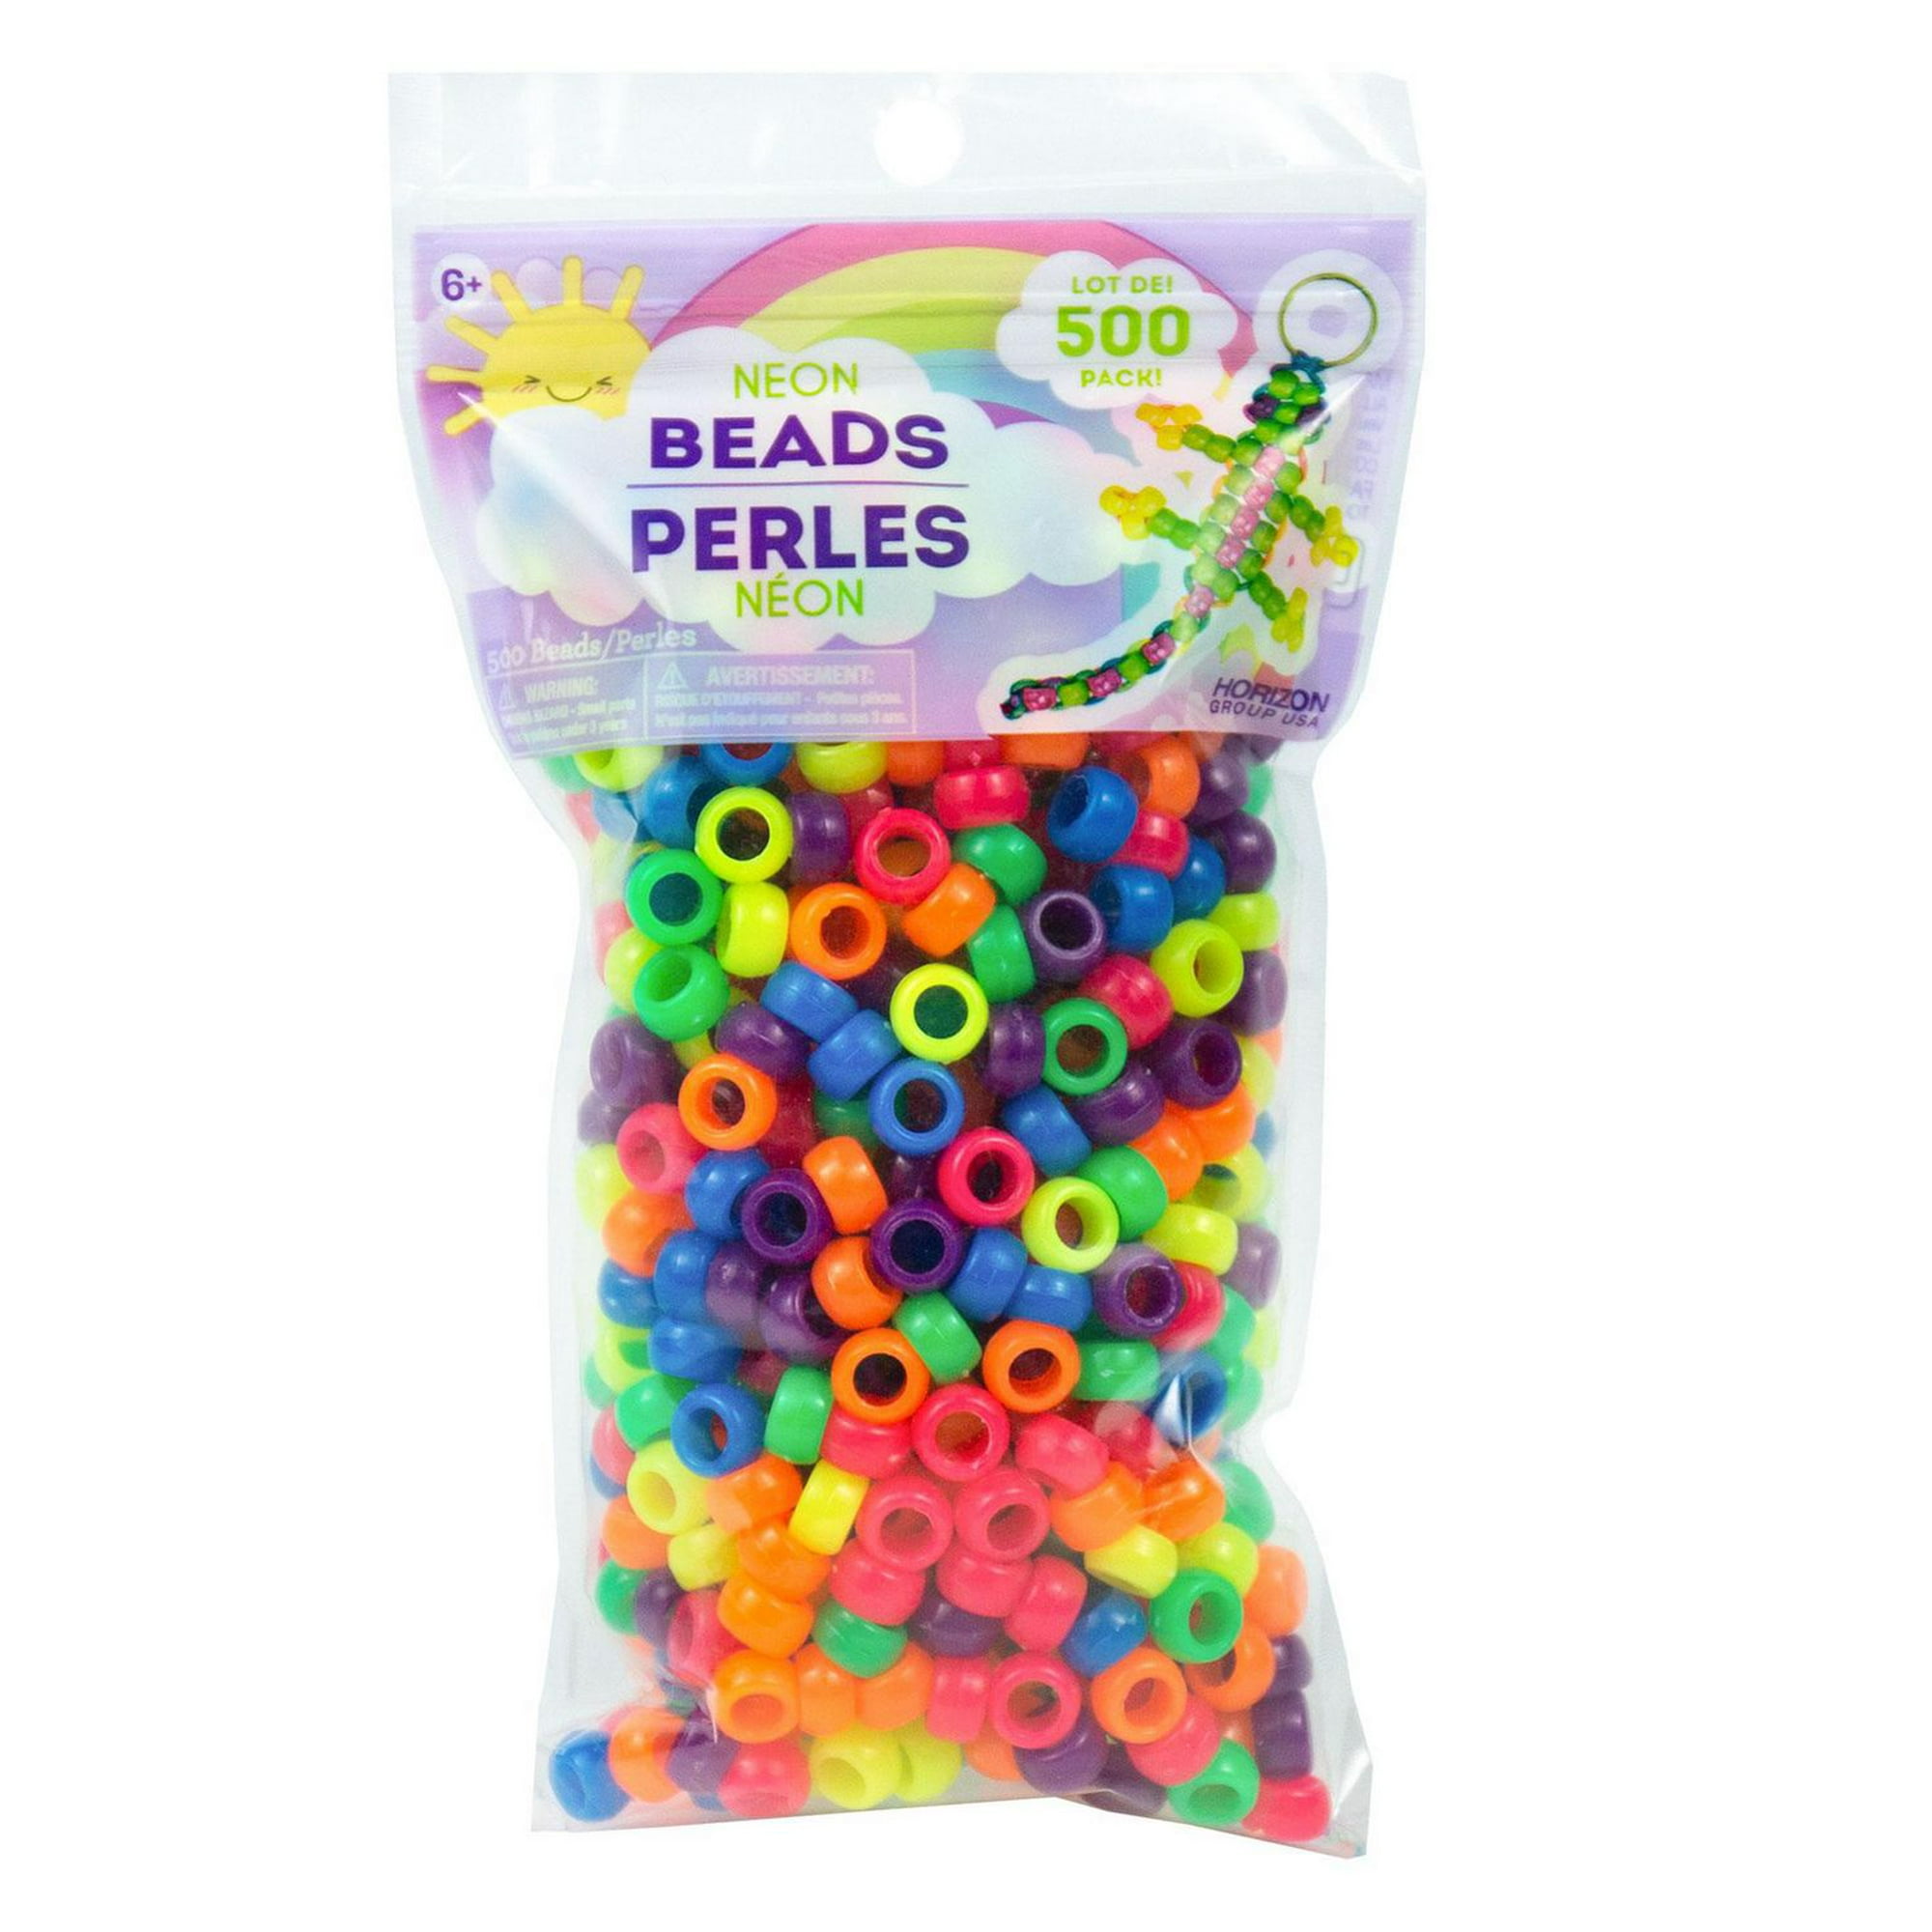 6 Color - 90 Count - 8mm Fishing Bead Wheel Combo Packs